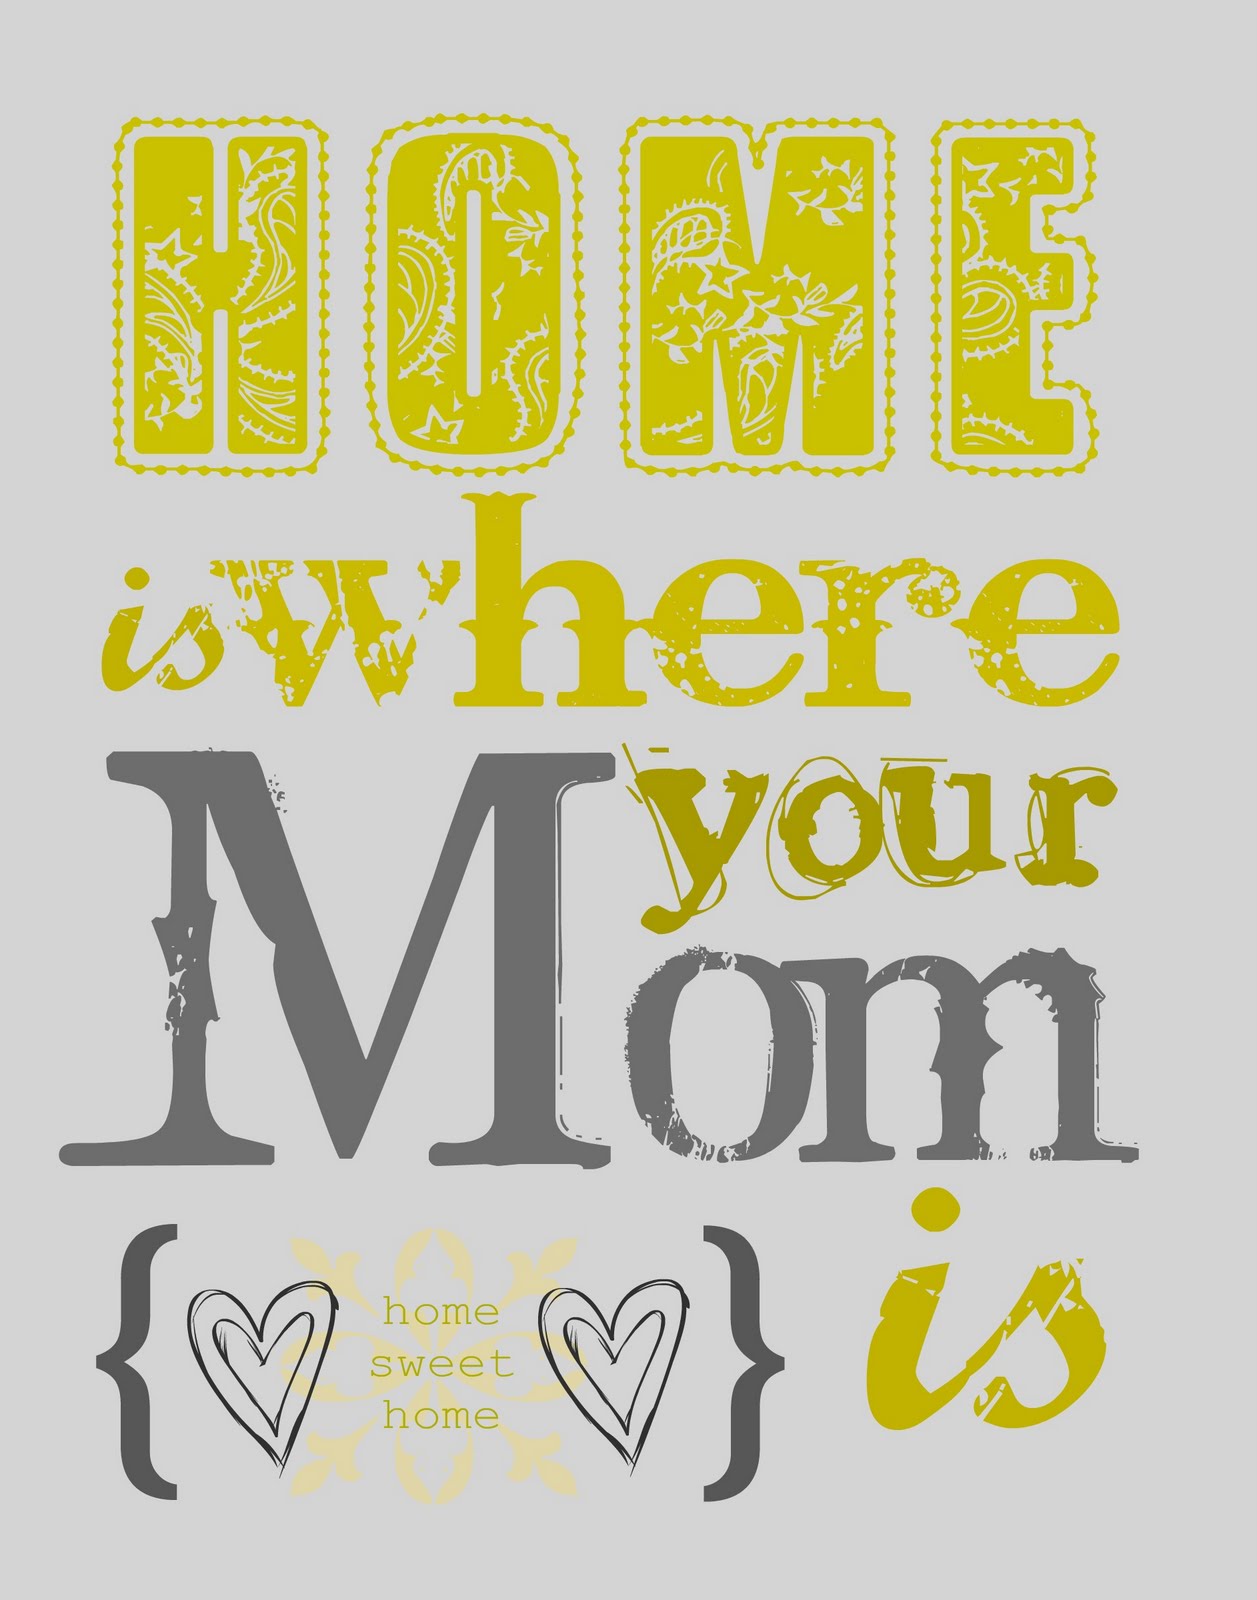 mother's day, mother's day free printables, mother's day gift ideas